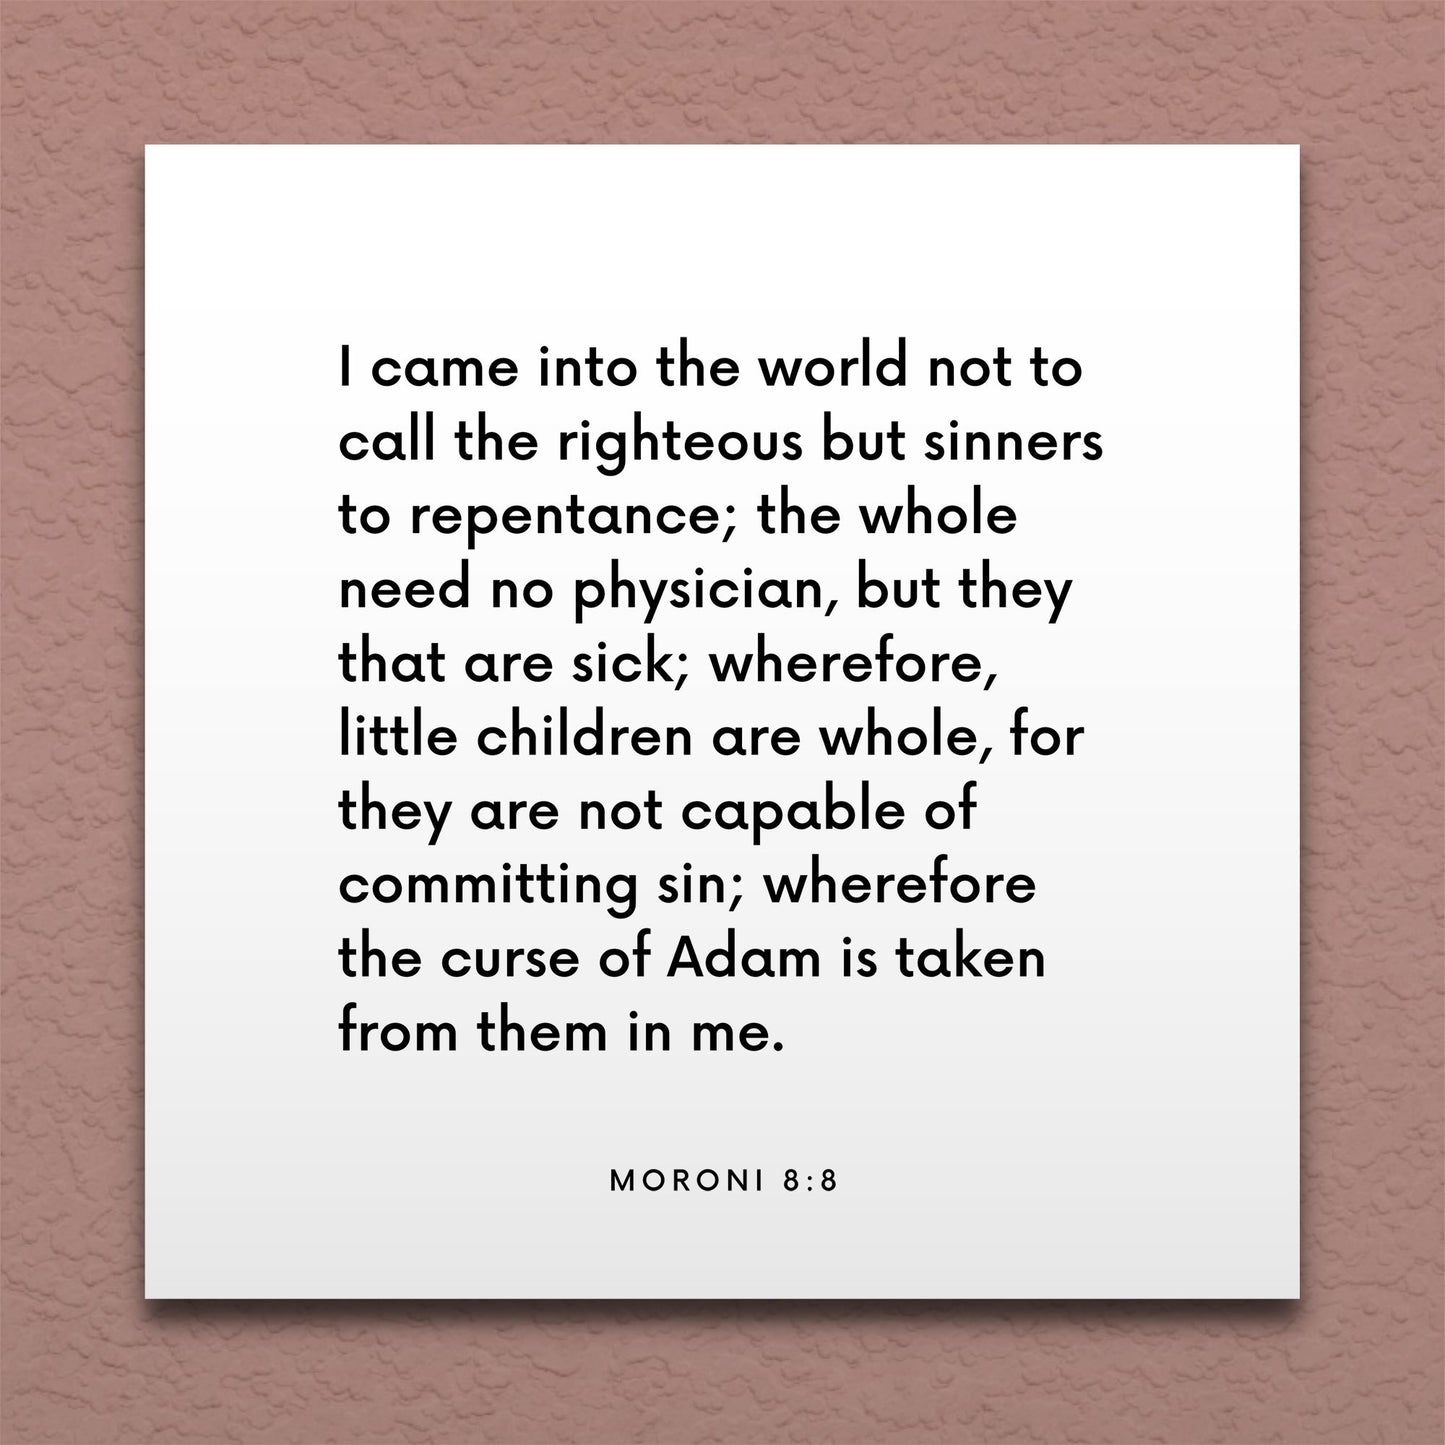 Wall-mounted scripture tile for Moroni 8:8 - "Little children are not capable of committing sin"